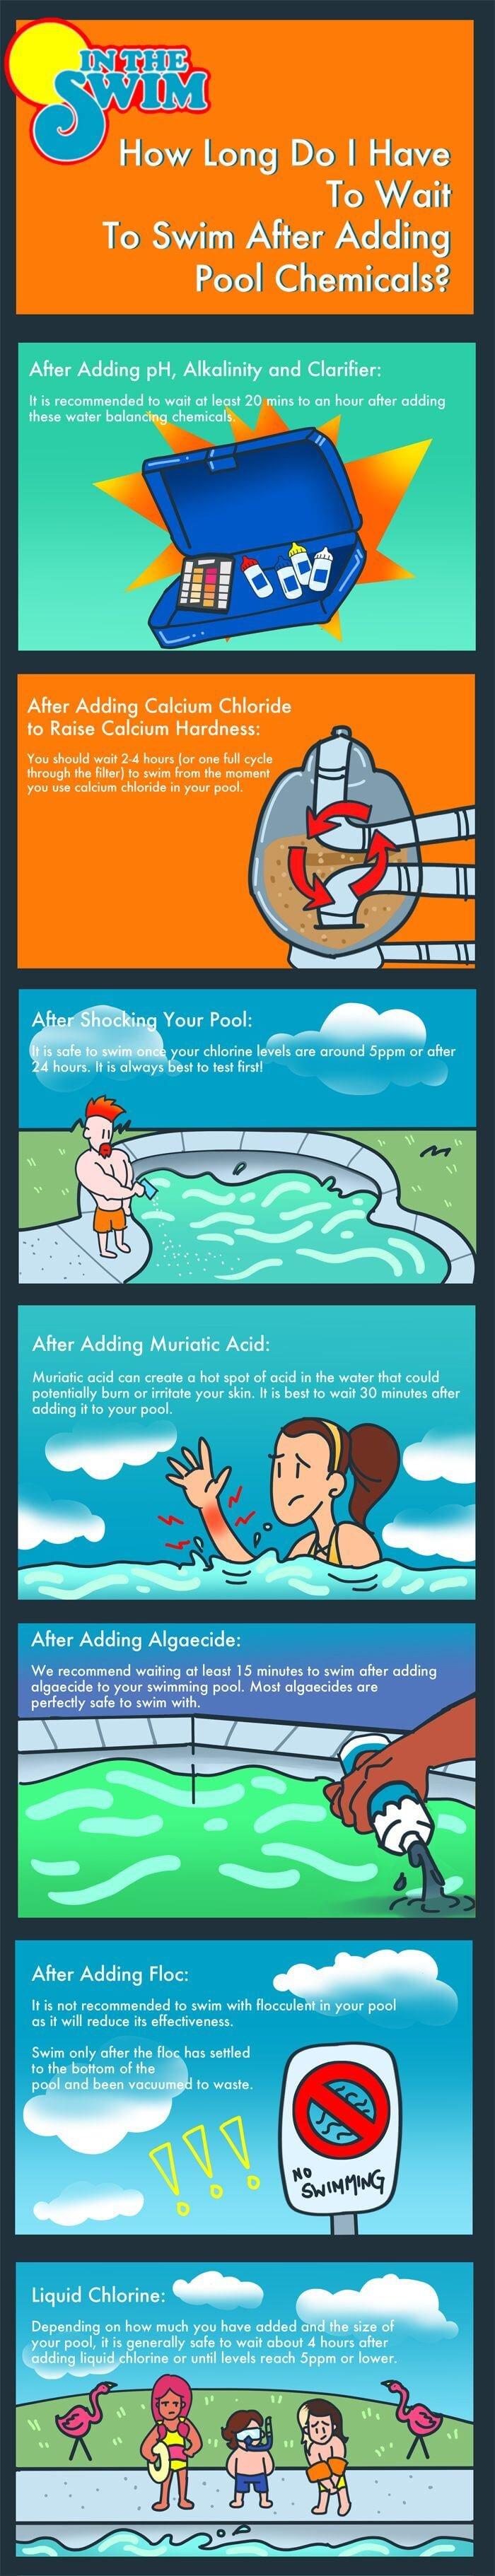 An infographic that answers the question: How long do I have to wait to swim after adding pool chemicals? Full text below.